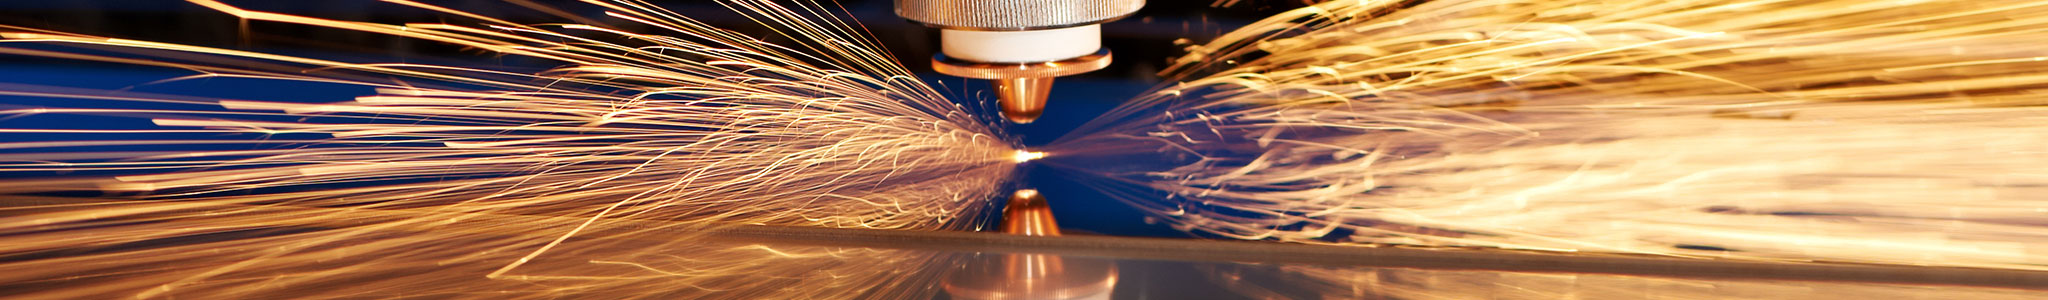 Image of laser cutting metal with sparks